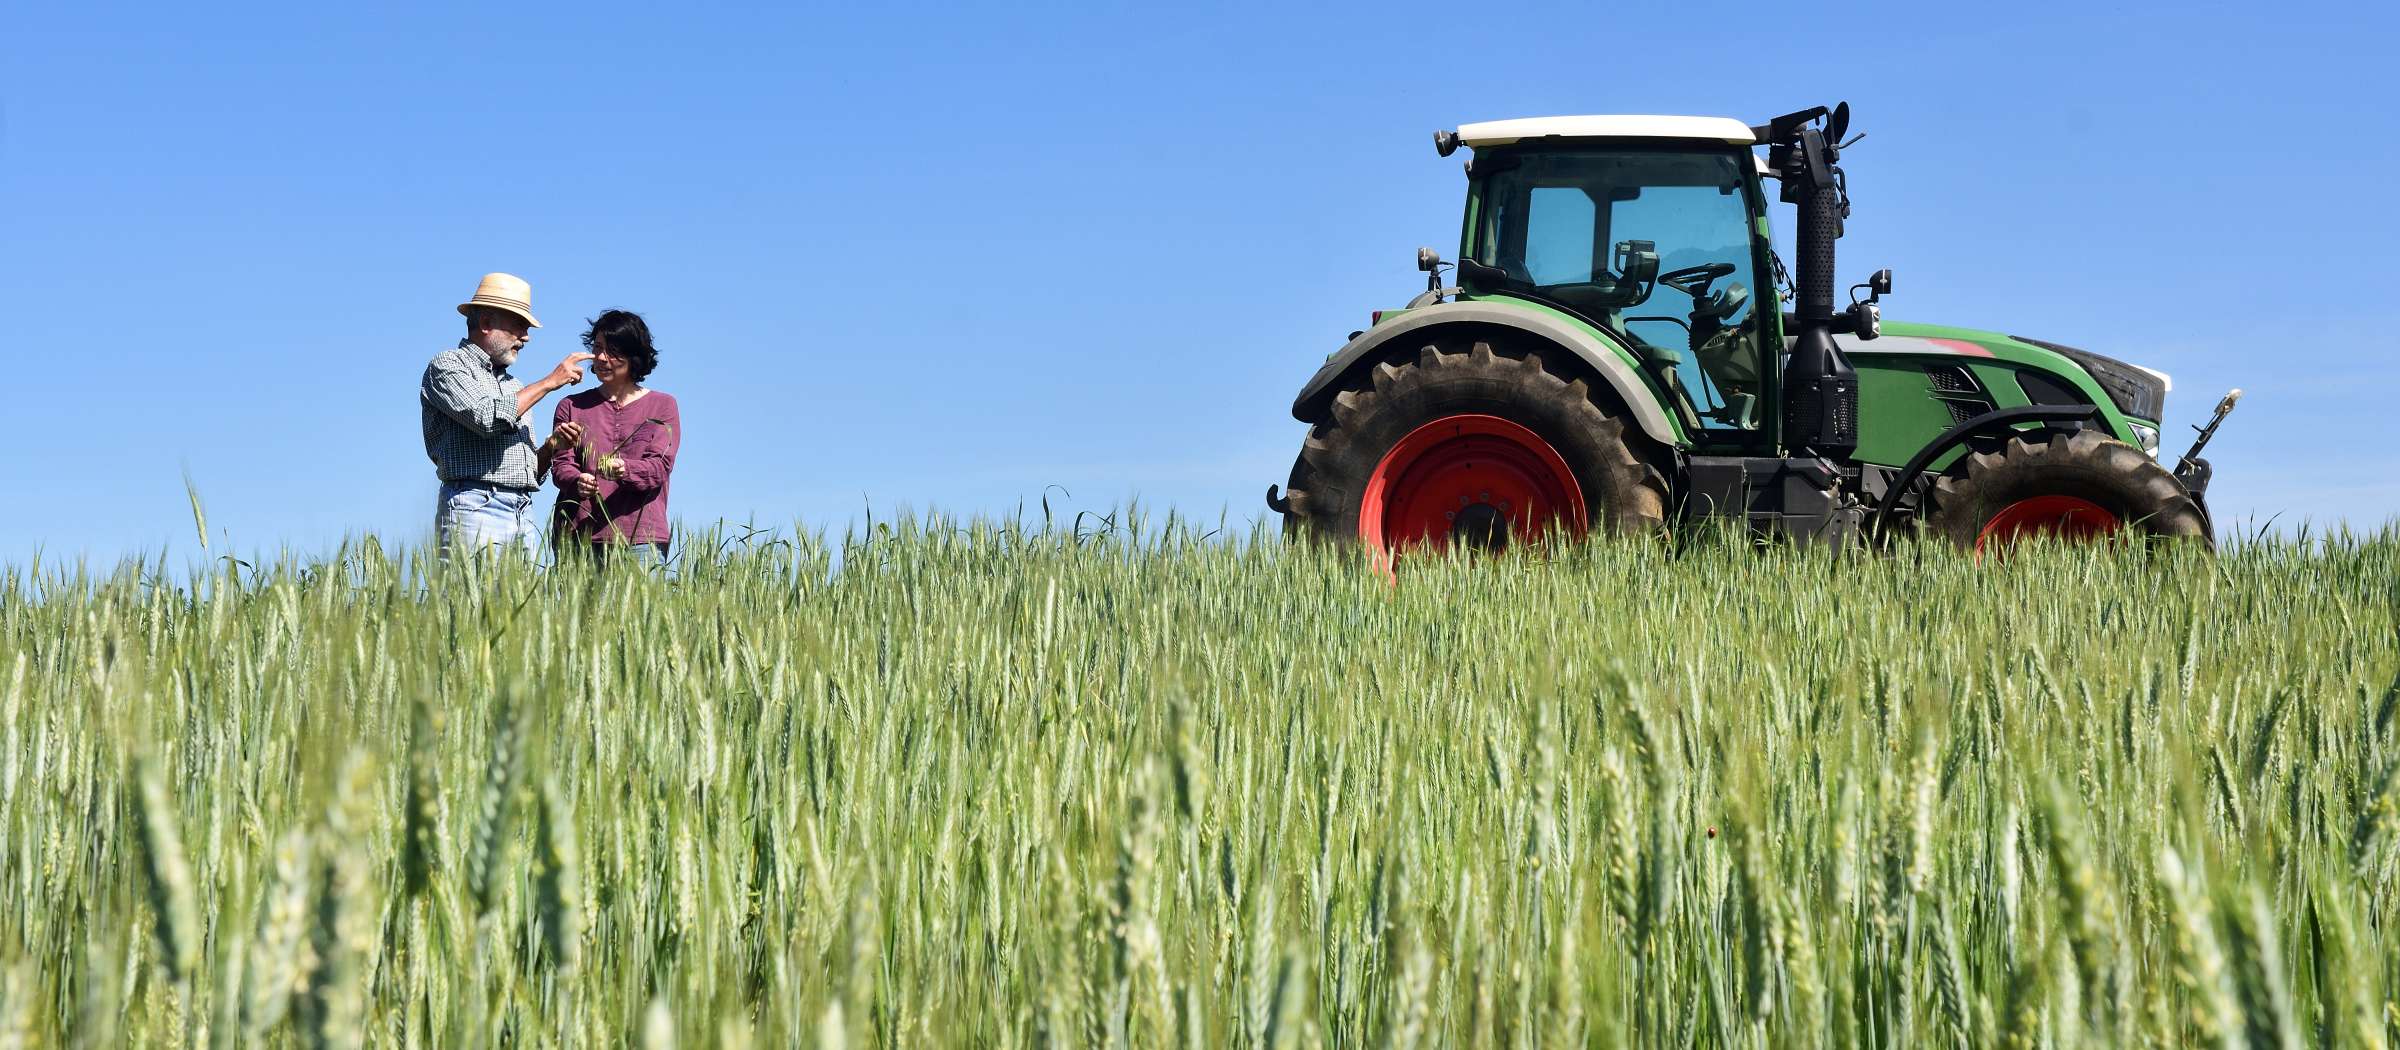 Two farmers stand in a wheat field near a tractor.